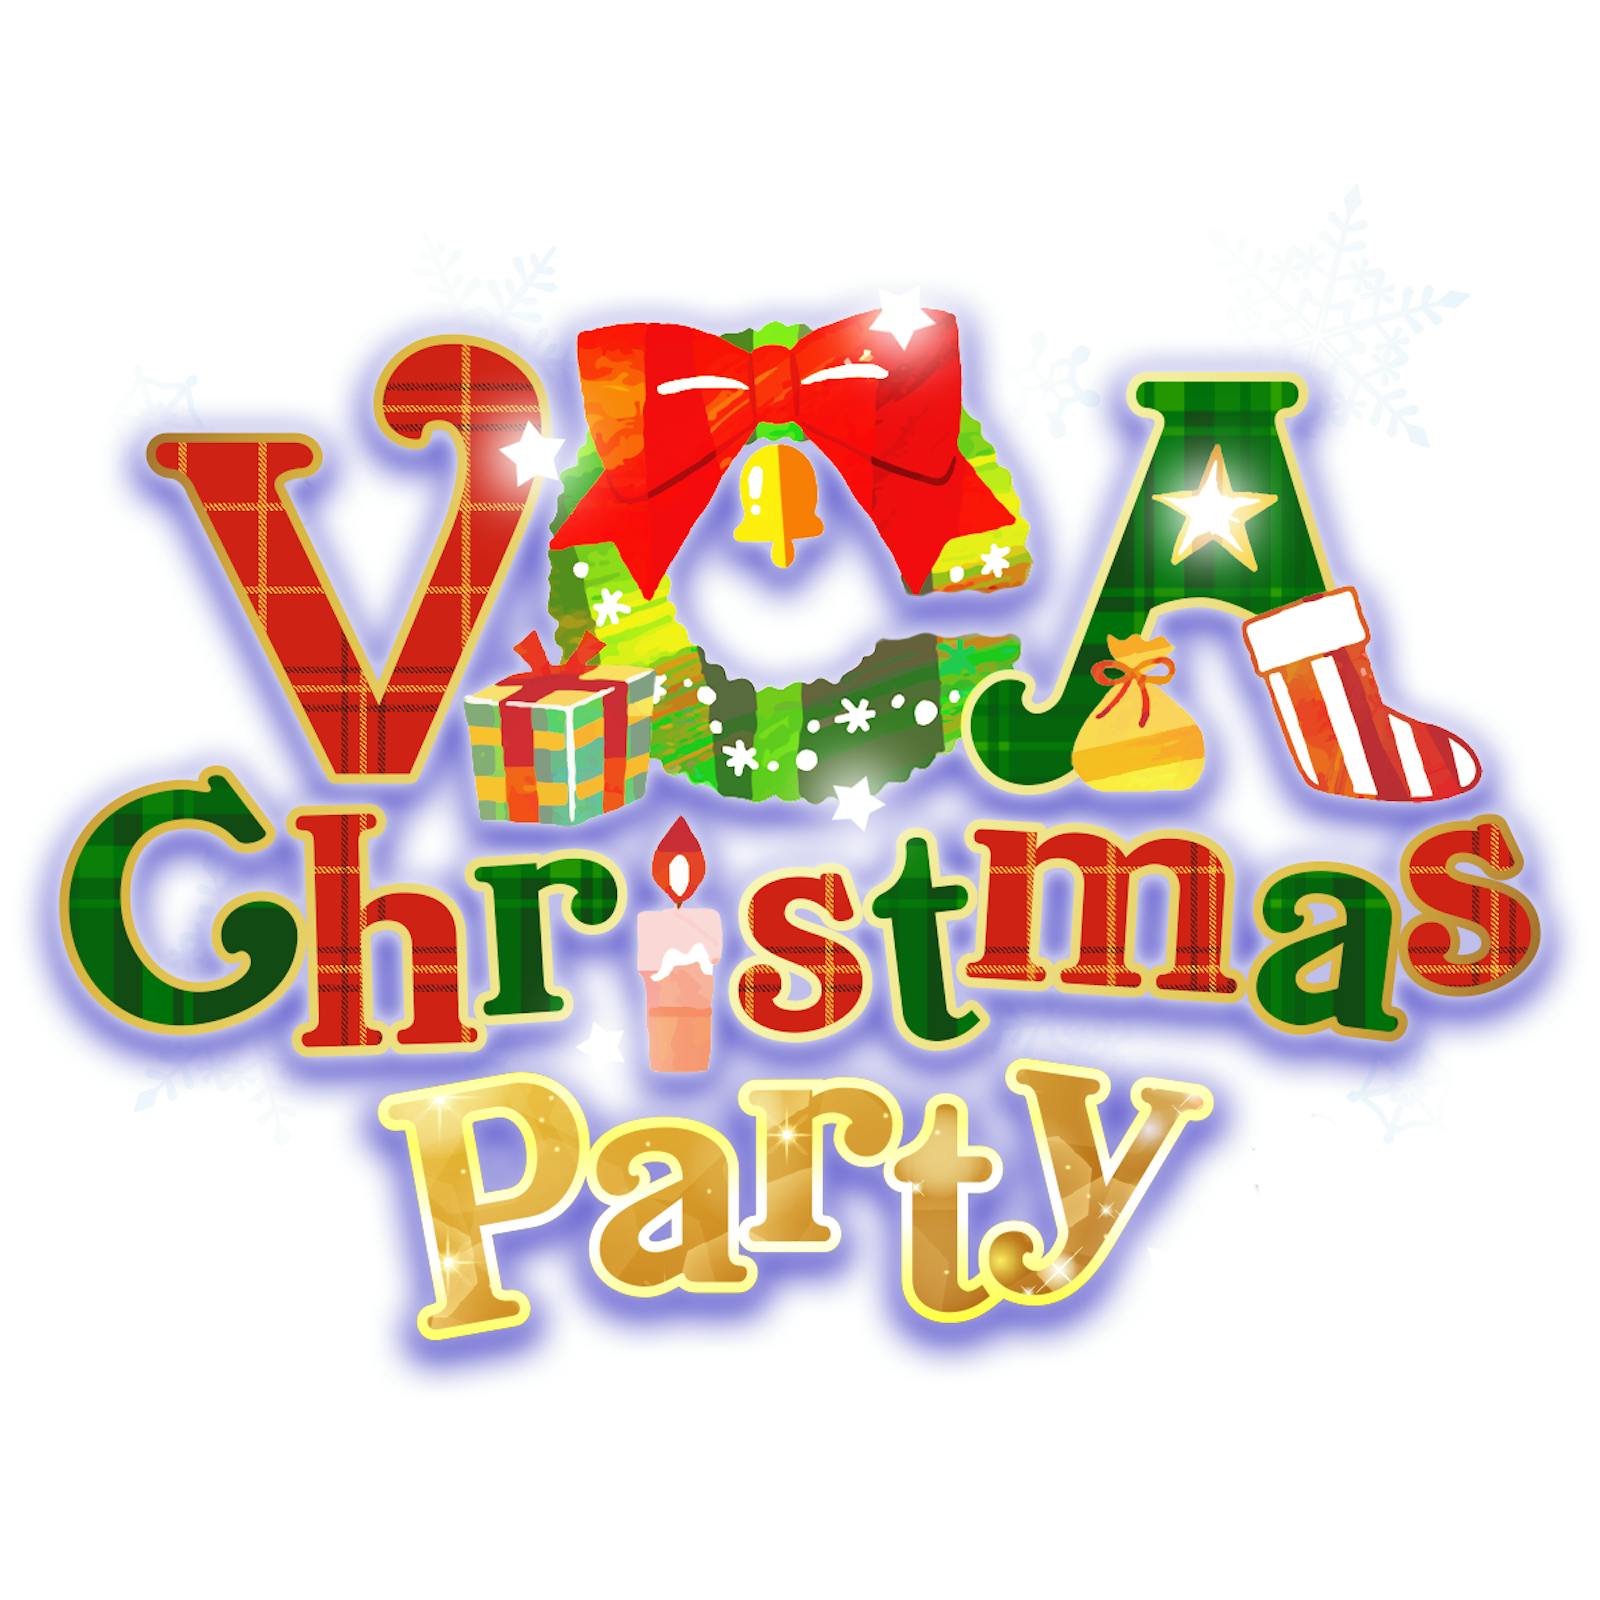 VCA Christmas Party ロゴ